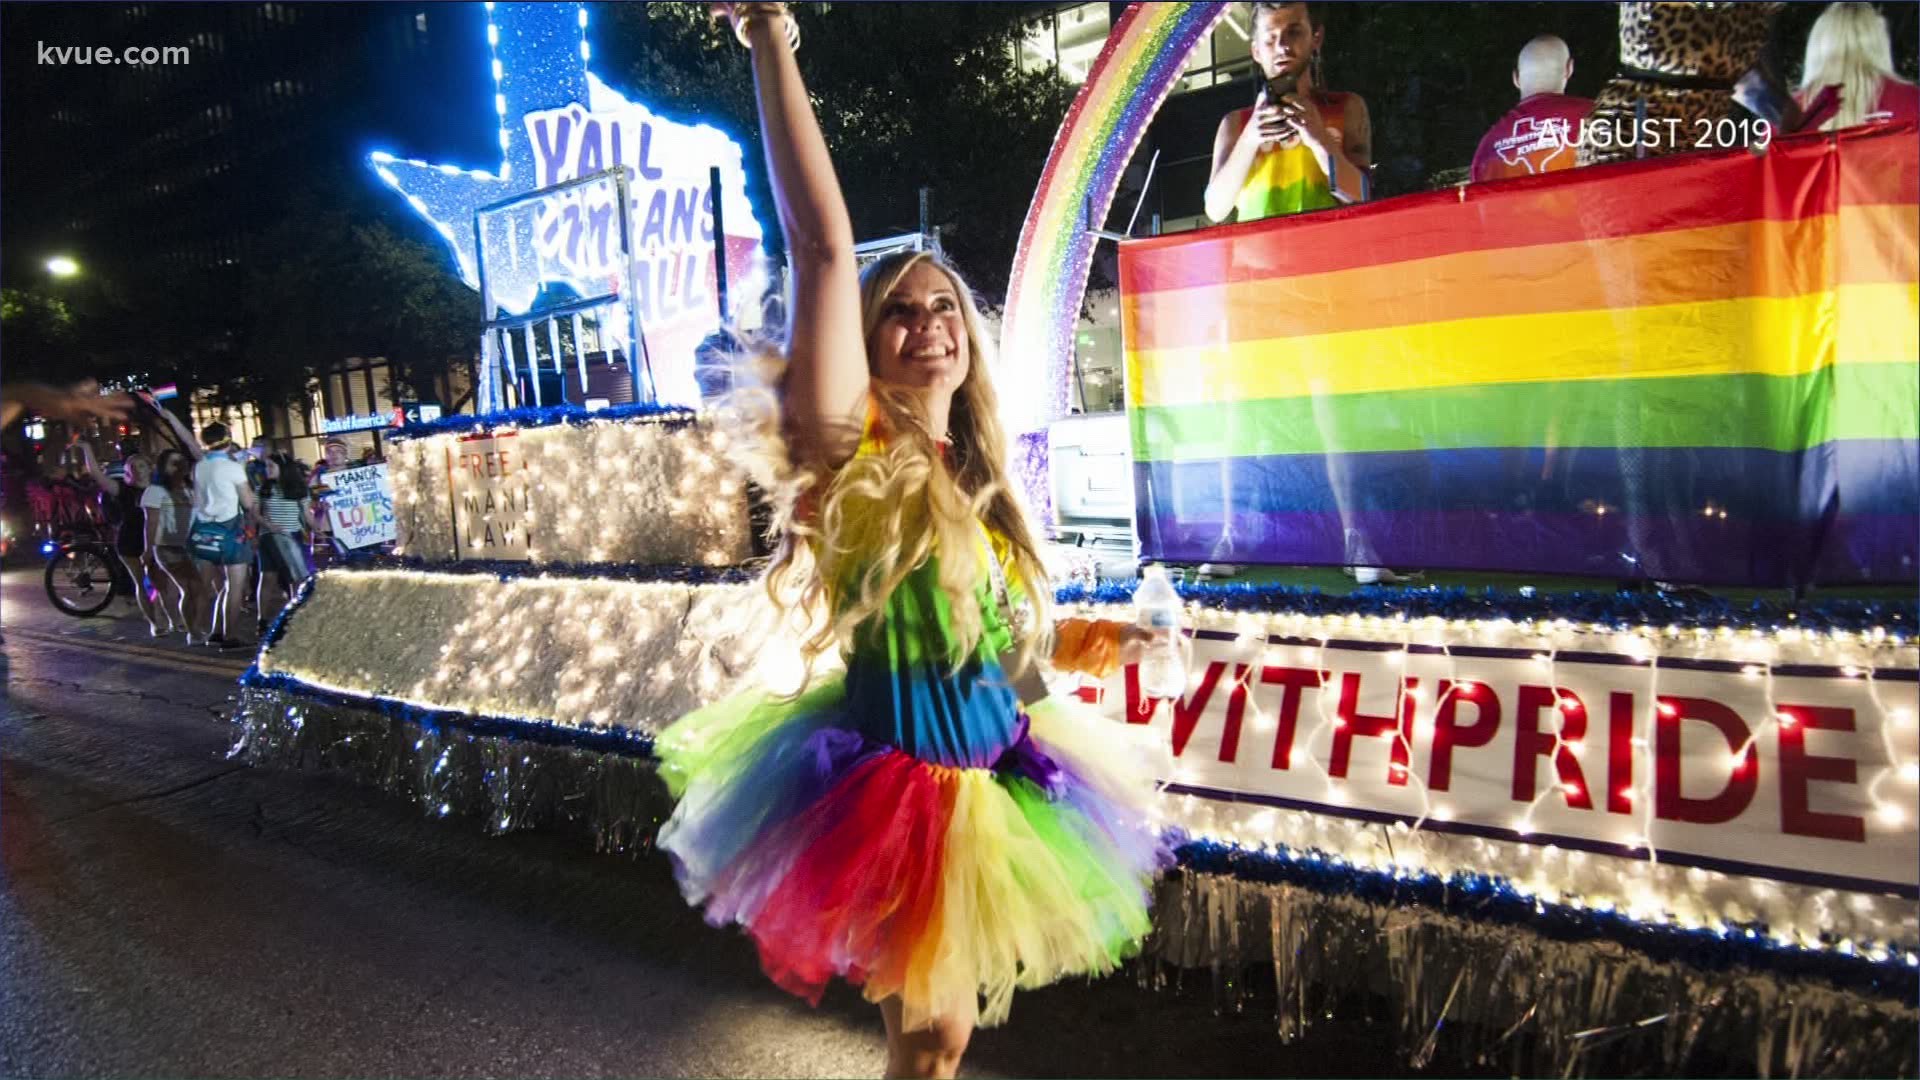 Concerns over COVID-19 have forced one of Austin's largest and most colorful celebrations to be canceled.